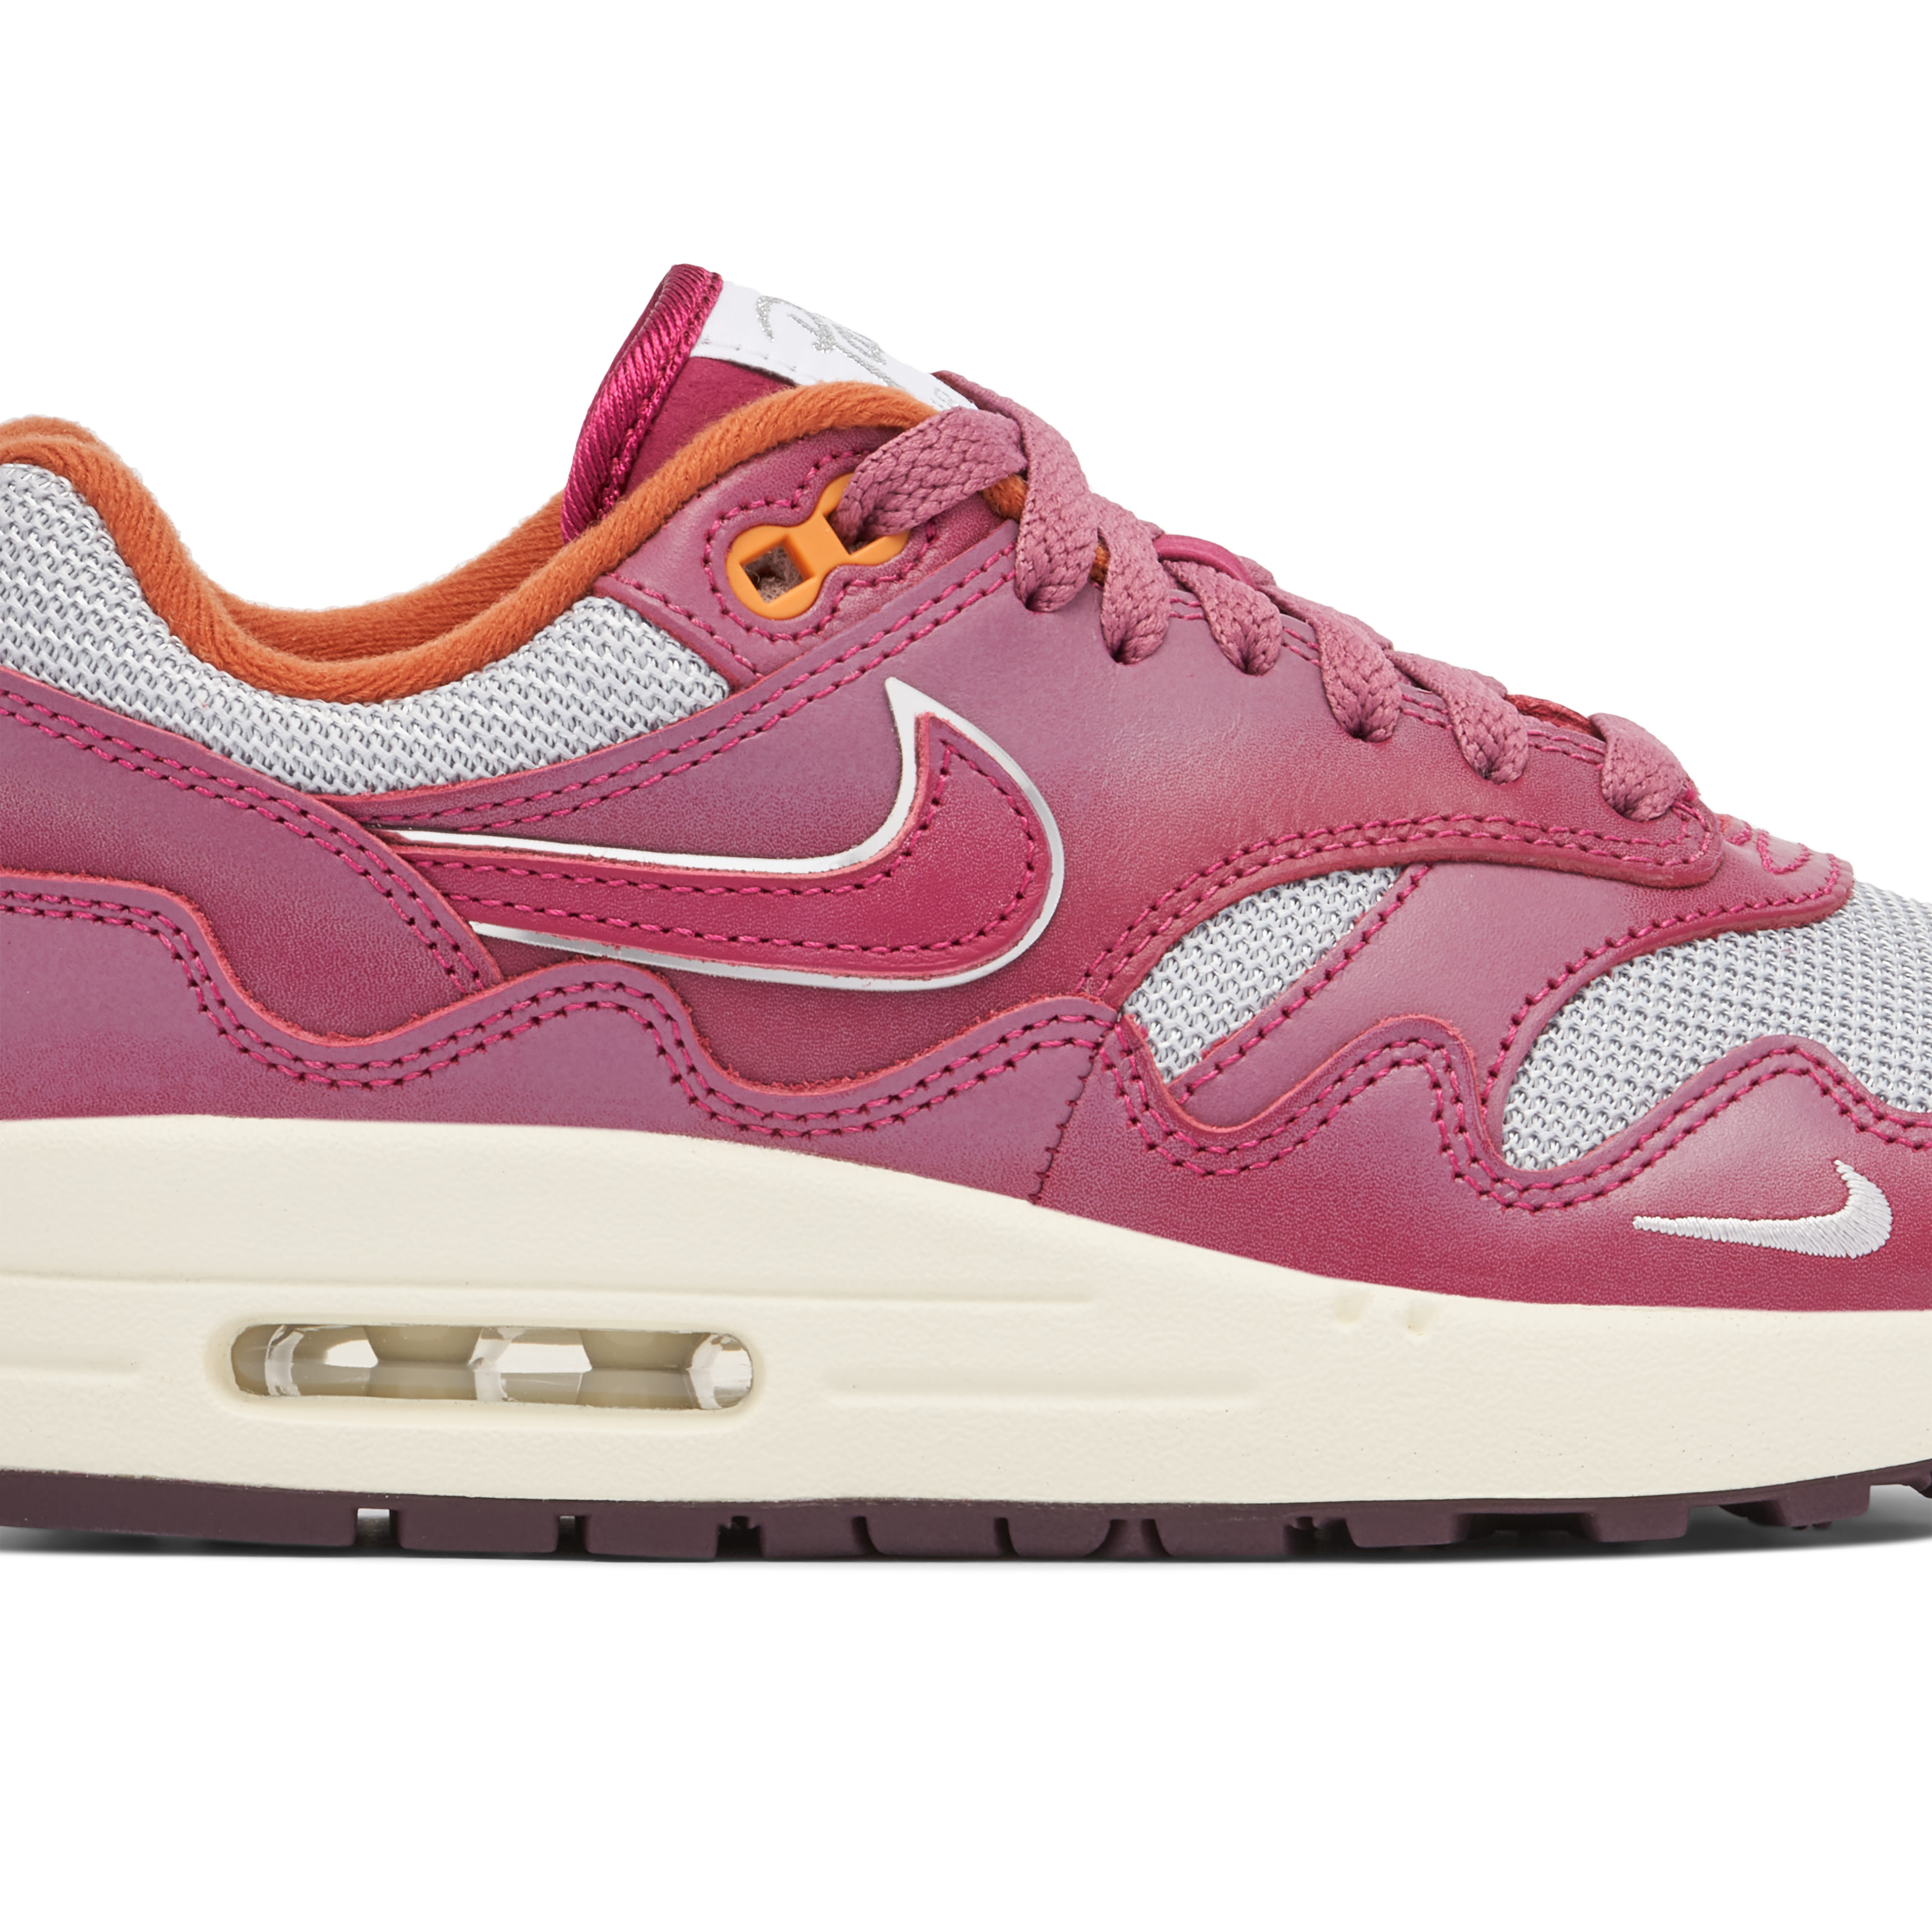 Patta x Nike Air Max 1 Night Maroon (without Bracelet)